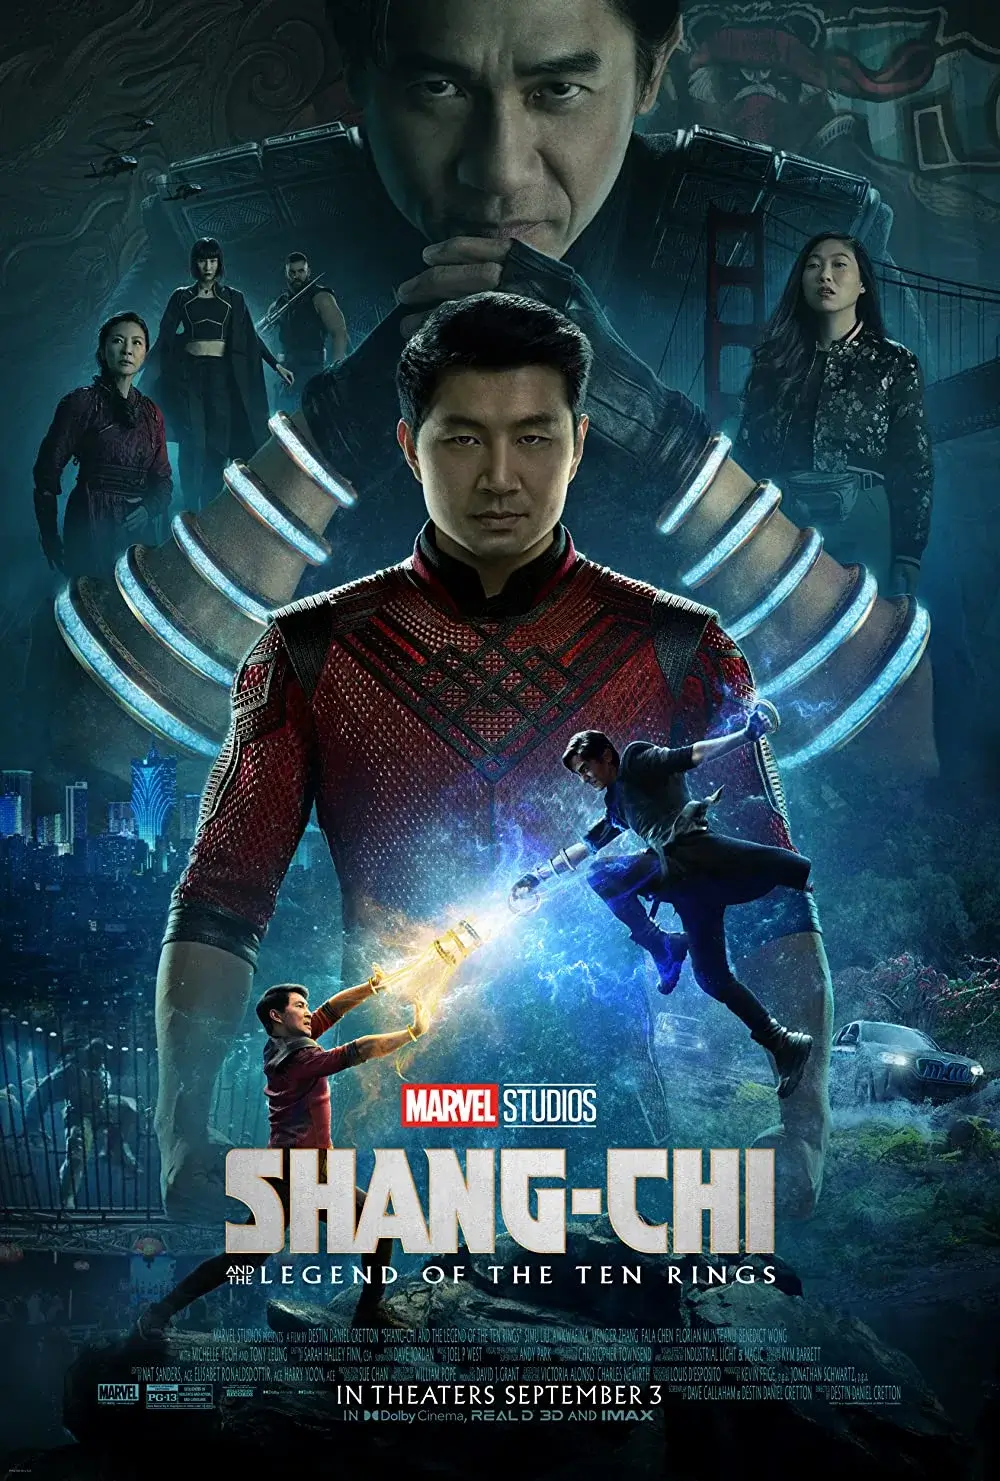 Header / Cover Image for 'Filmrecensie: Shang-Chi and the Legend of the Ten Rings'